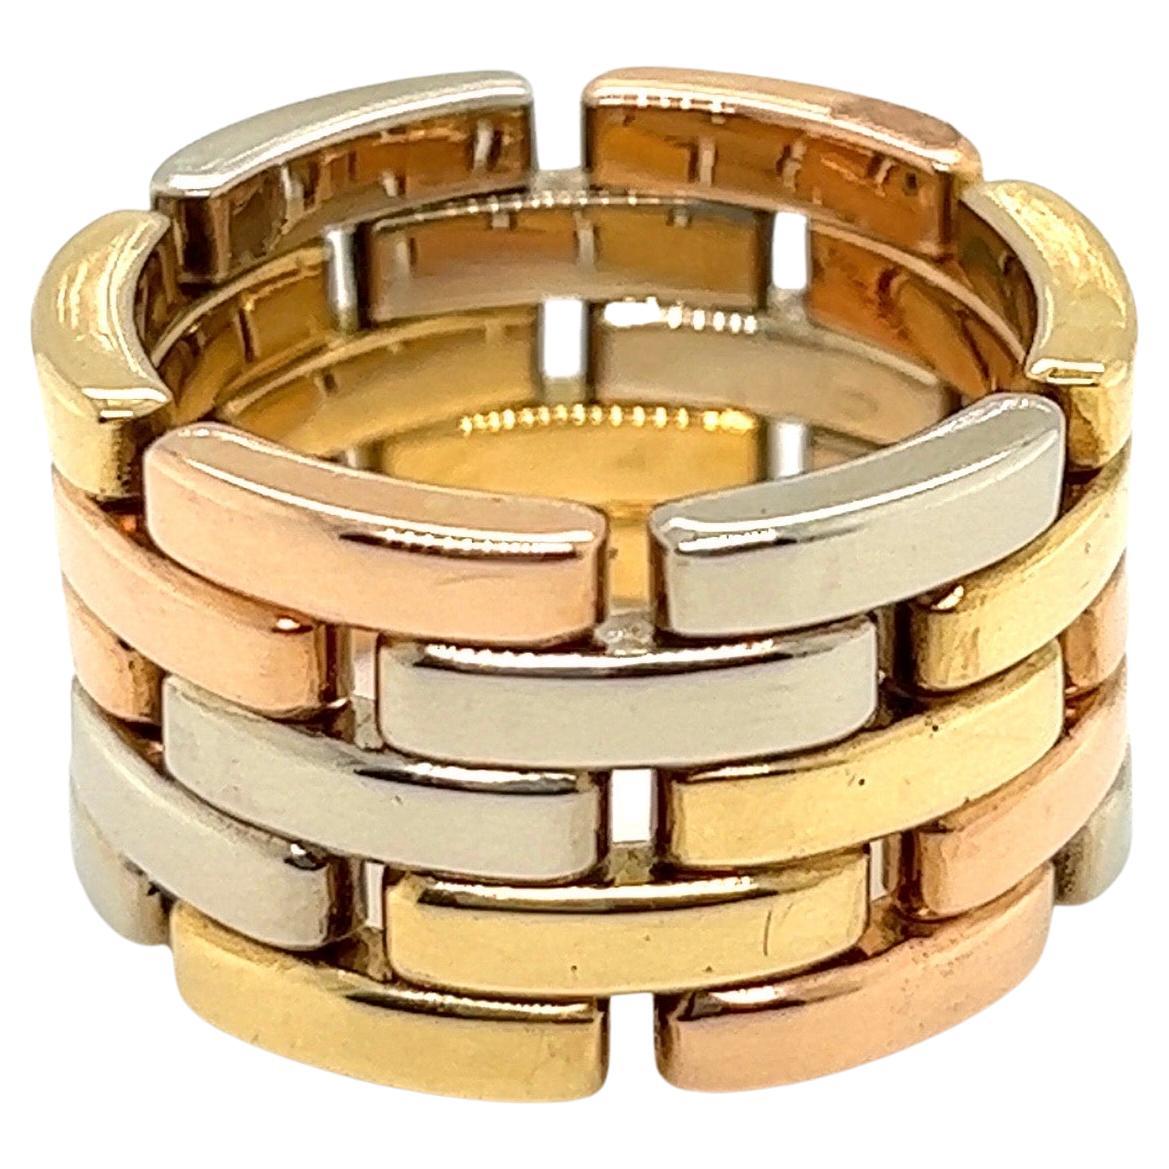 18 Karat Yellow White and Rose Gold Maillon Panthère 5 Row Band Ring by Cartier